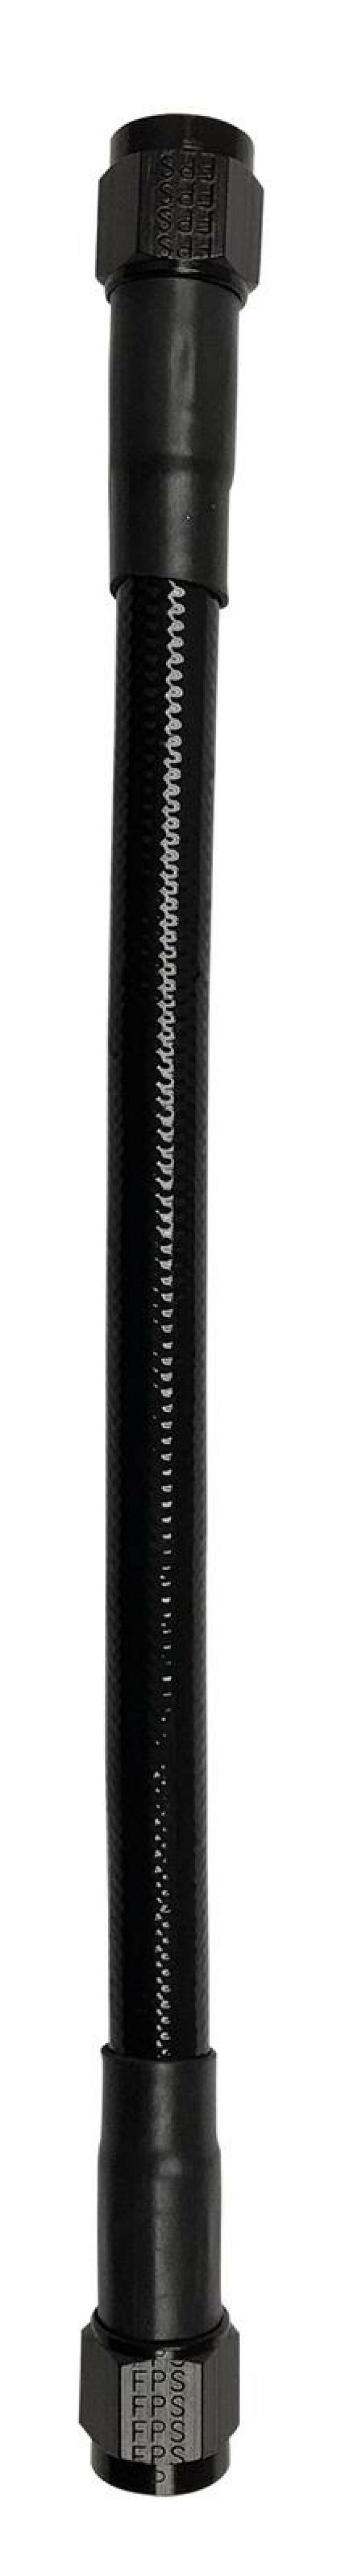 Fragola -10AN Ext Black PTFE Hose Assembly Straight x Straight 36in - 6029-1-1-36BL